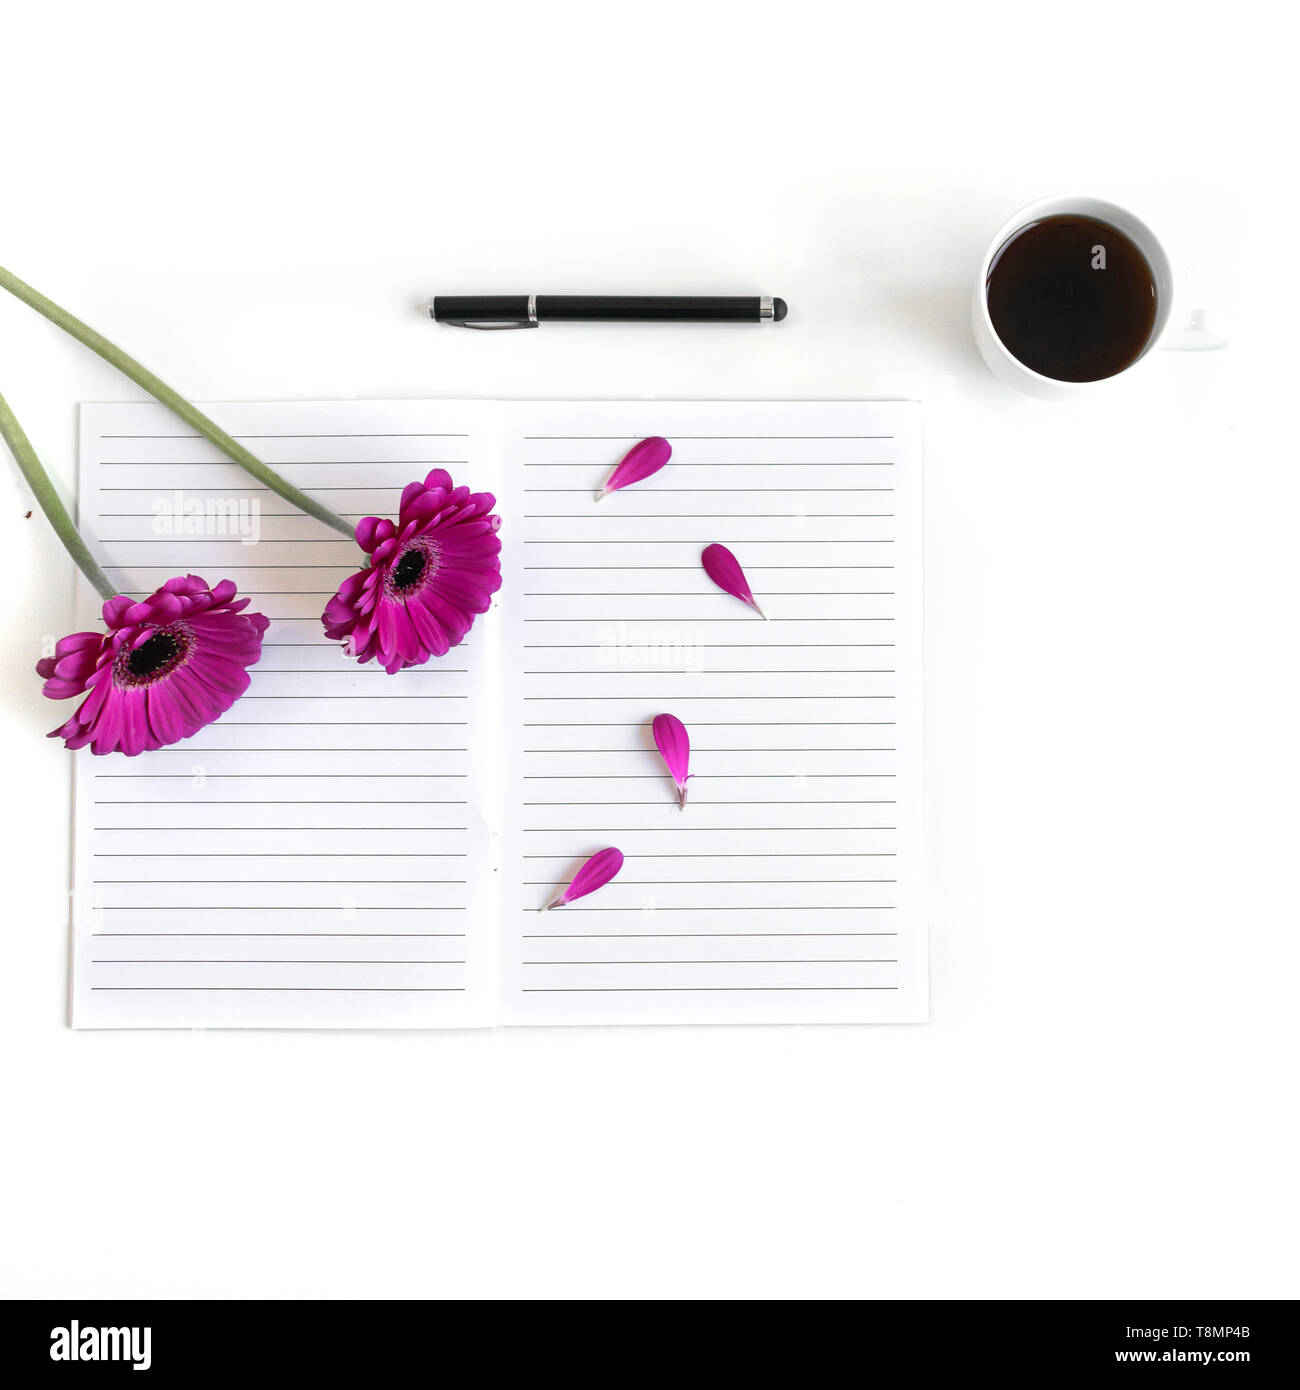 Flat lay open Bible or book and pink, purple, violet, red Gerbera flower on a white background. With pink petals, black tea, open journal, black pen Stock Photo